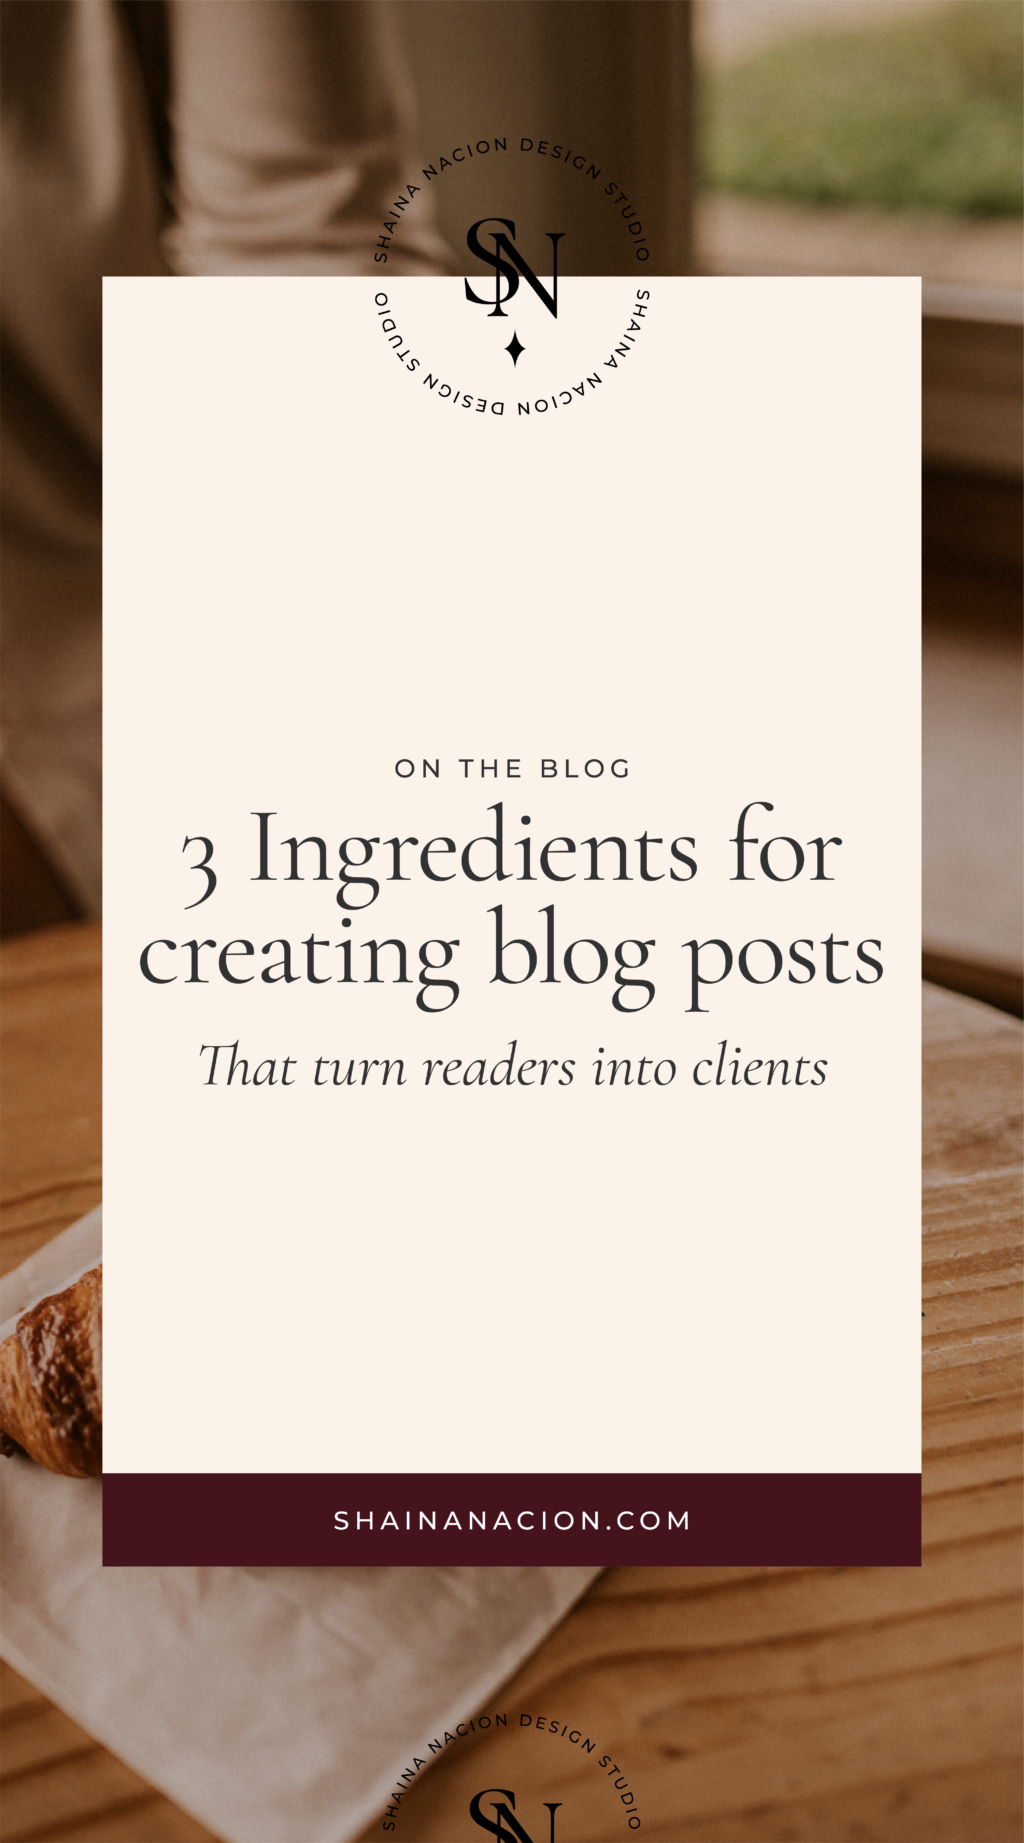 3 Ingredients for creating blog posts that convert